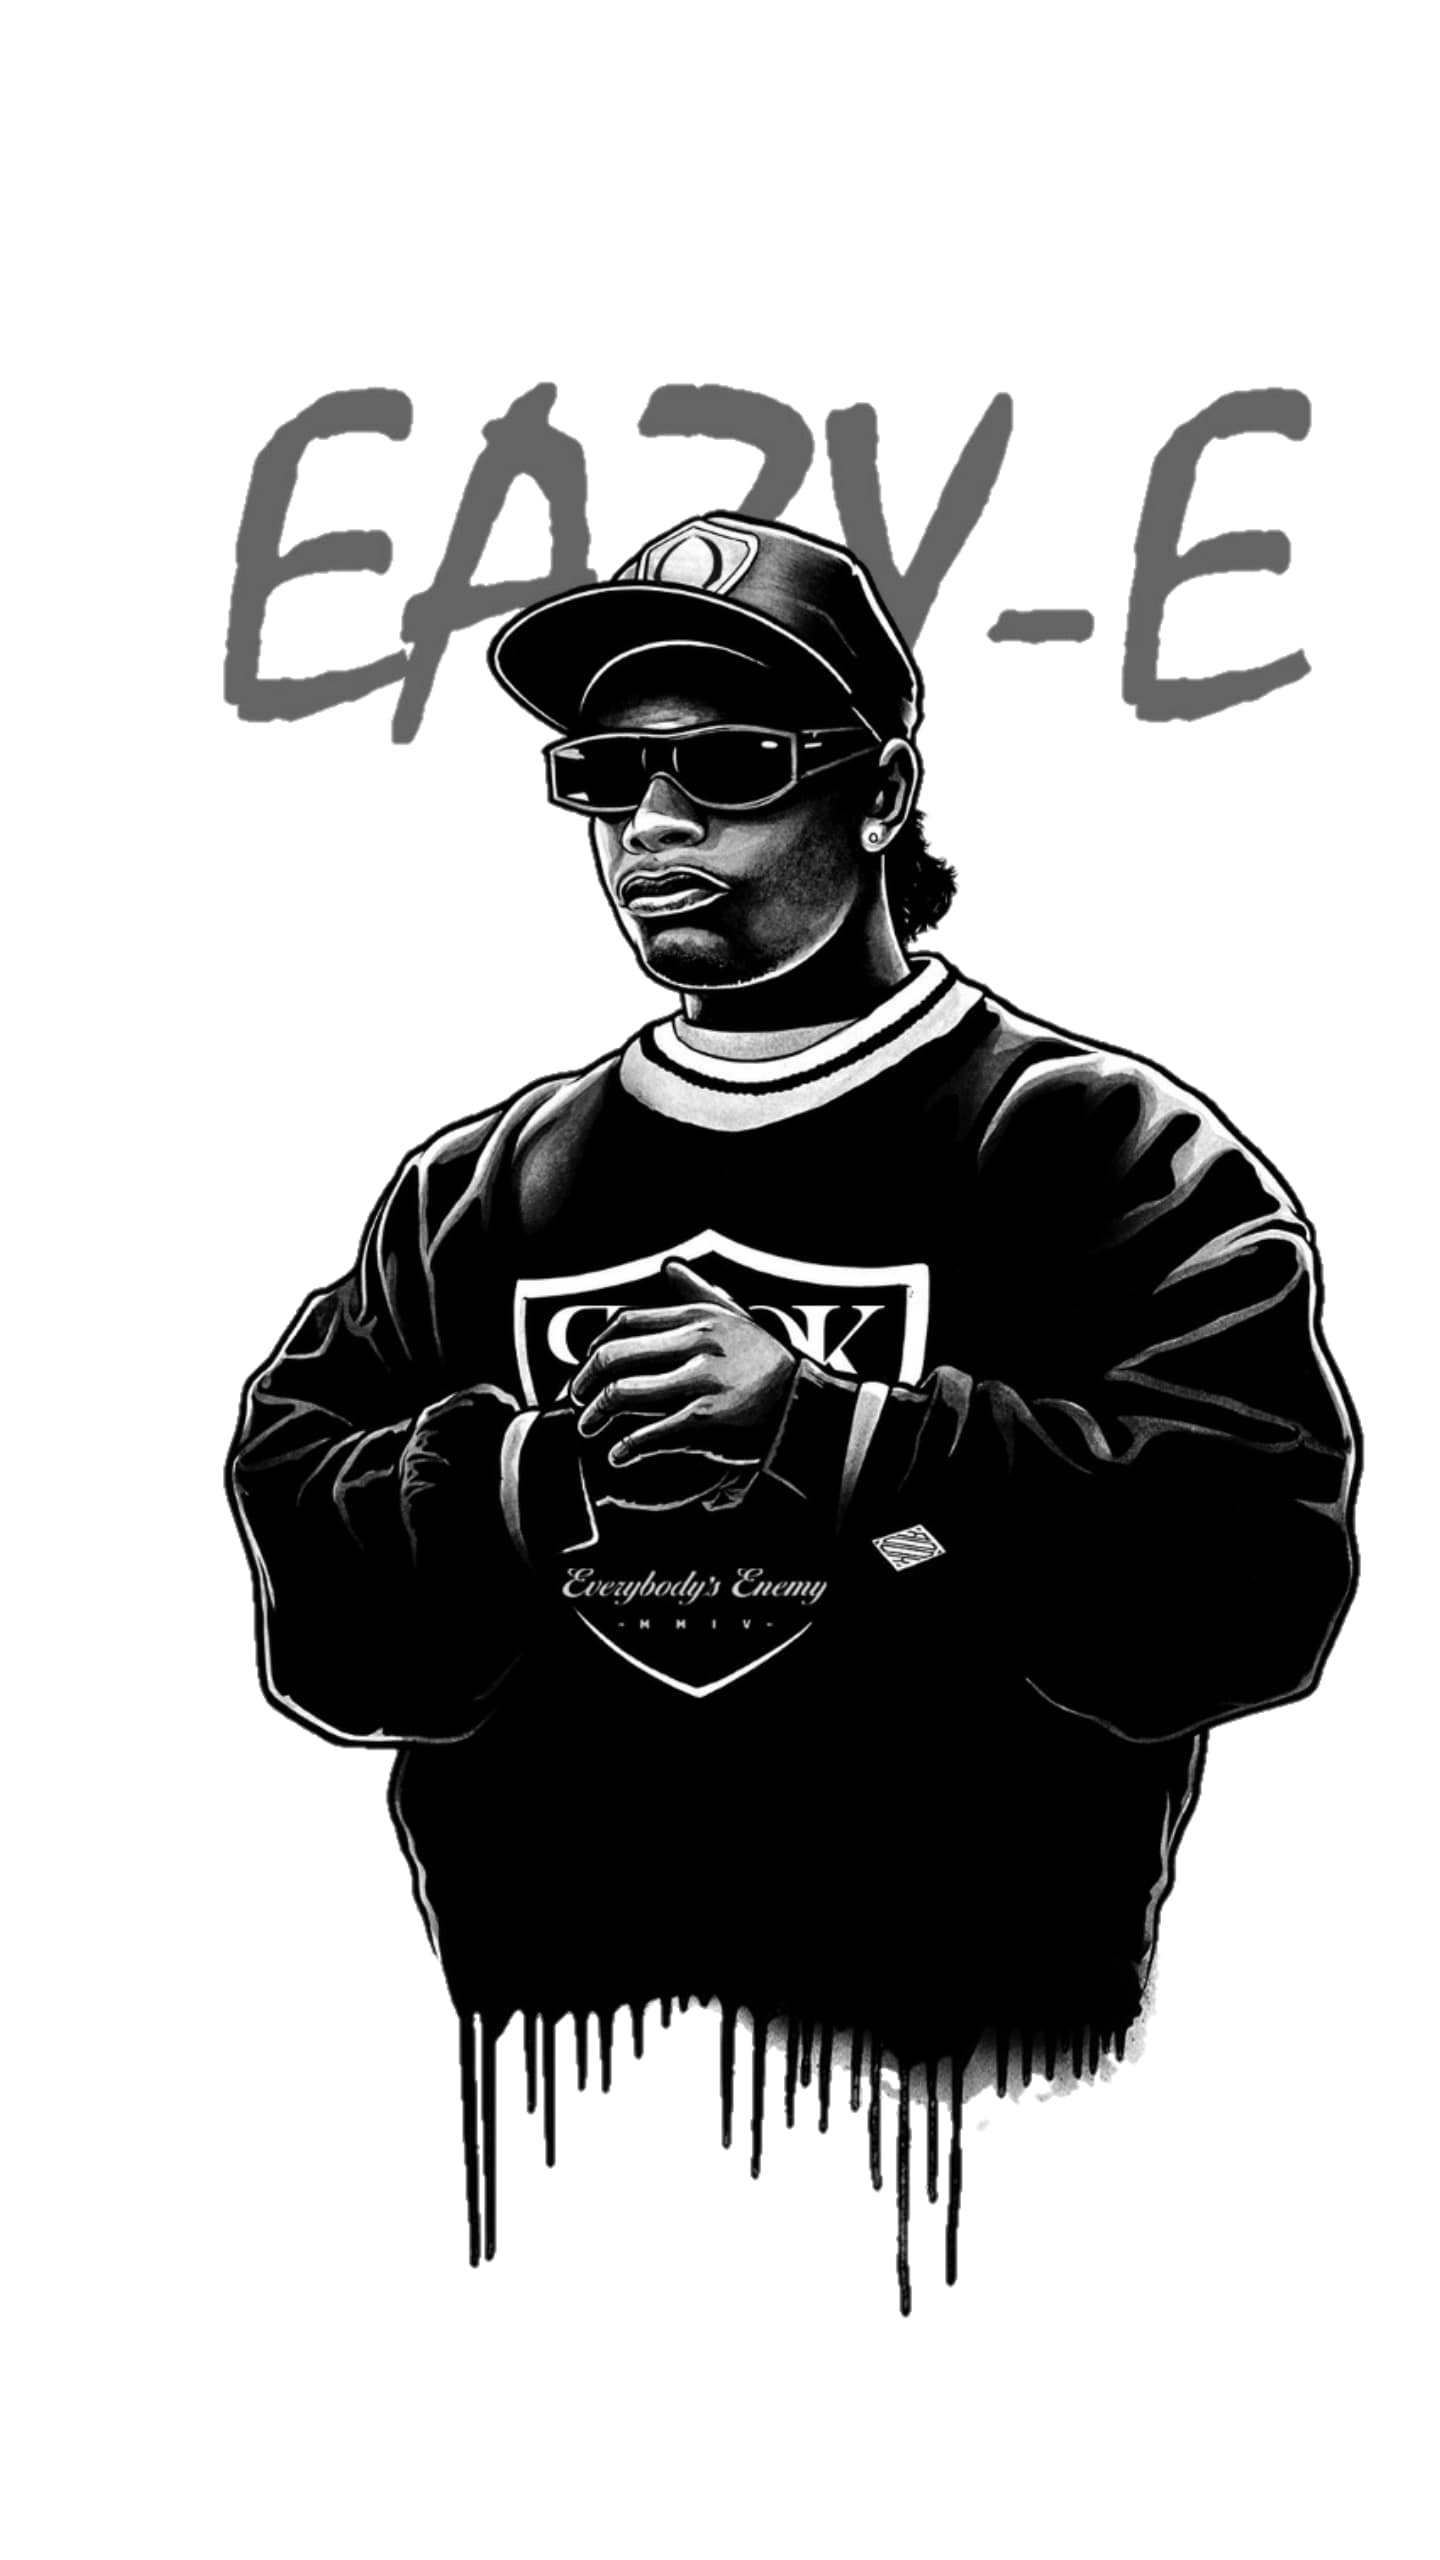 Eazy E wallpapers, Free backgrounds, 1440x2560 HD Handy